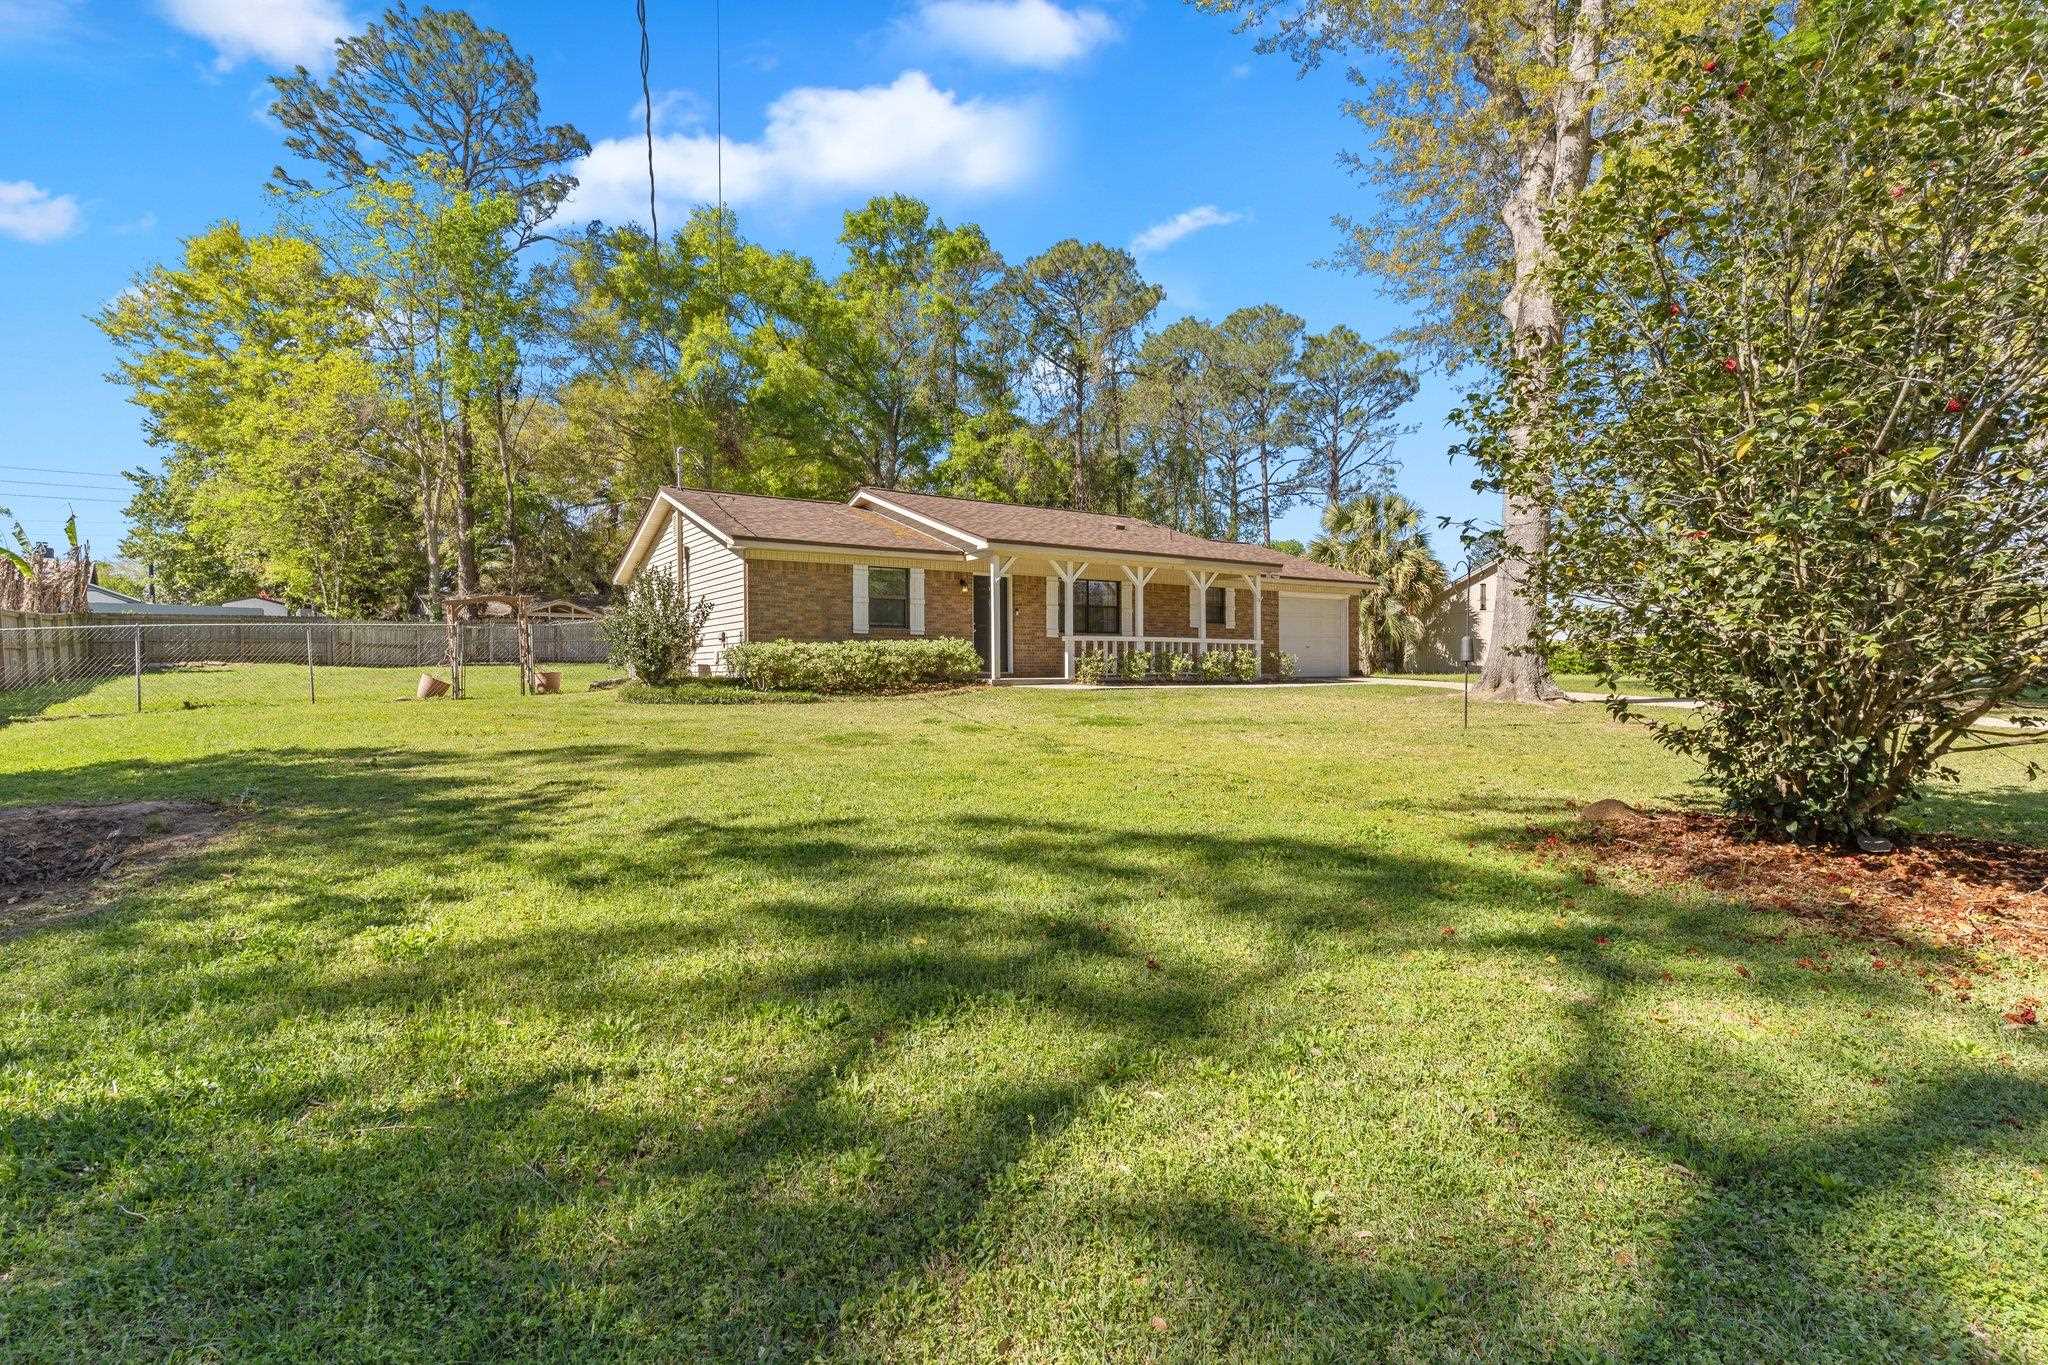 3129 Lookout Trail,TALLAHASSEE,Florida 32309,3 Bedrooms Bedrooms,2 BathroomsBathrooms,Detached single family,3129 Lookout Trail,369944